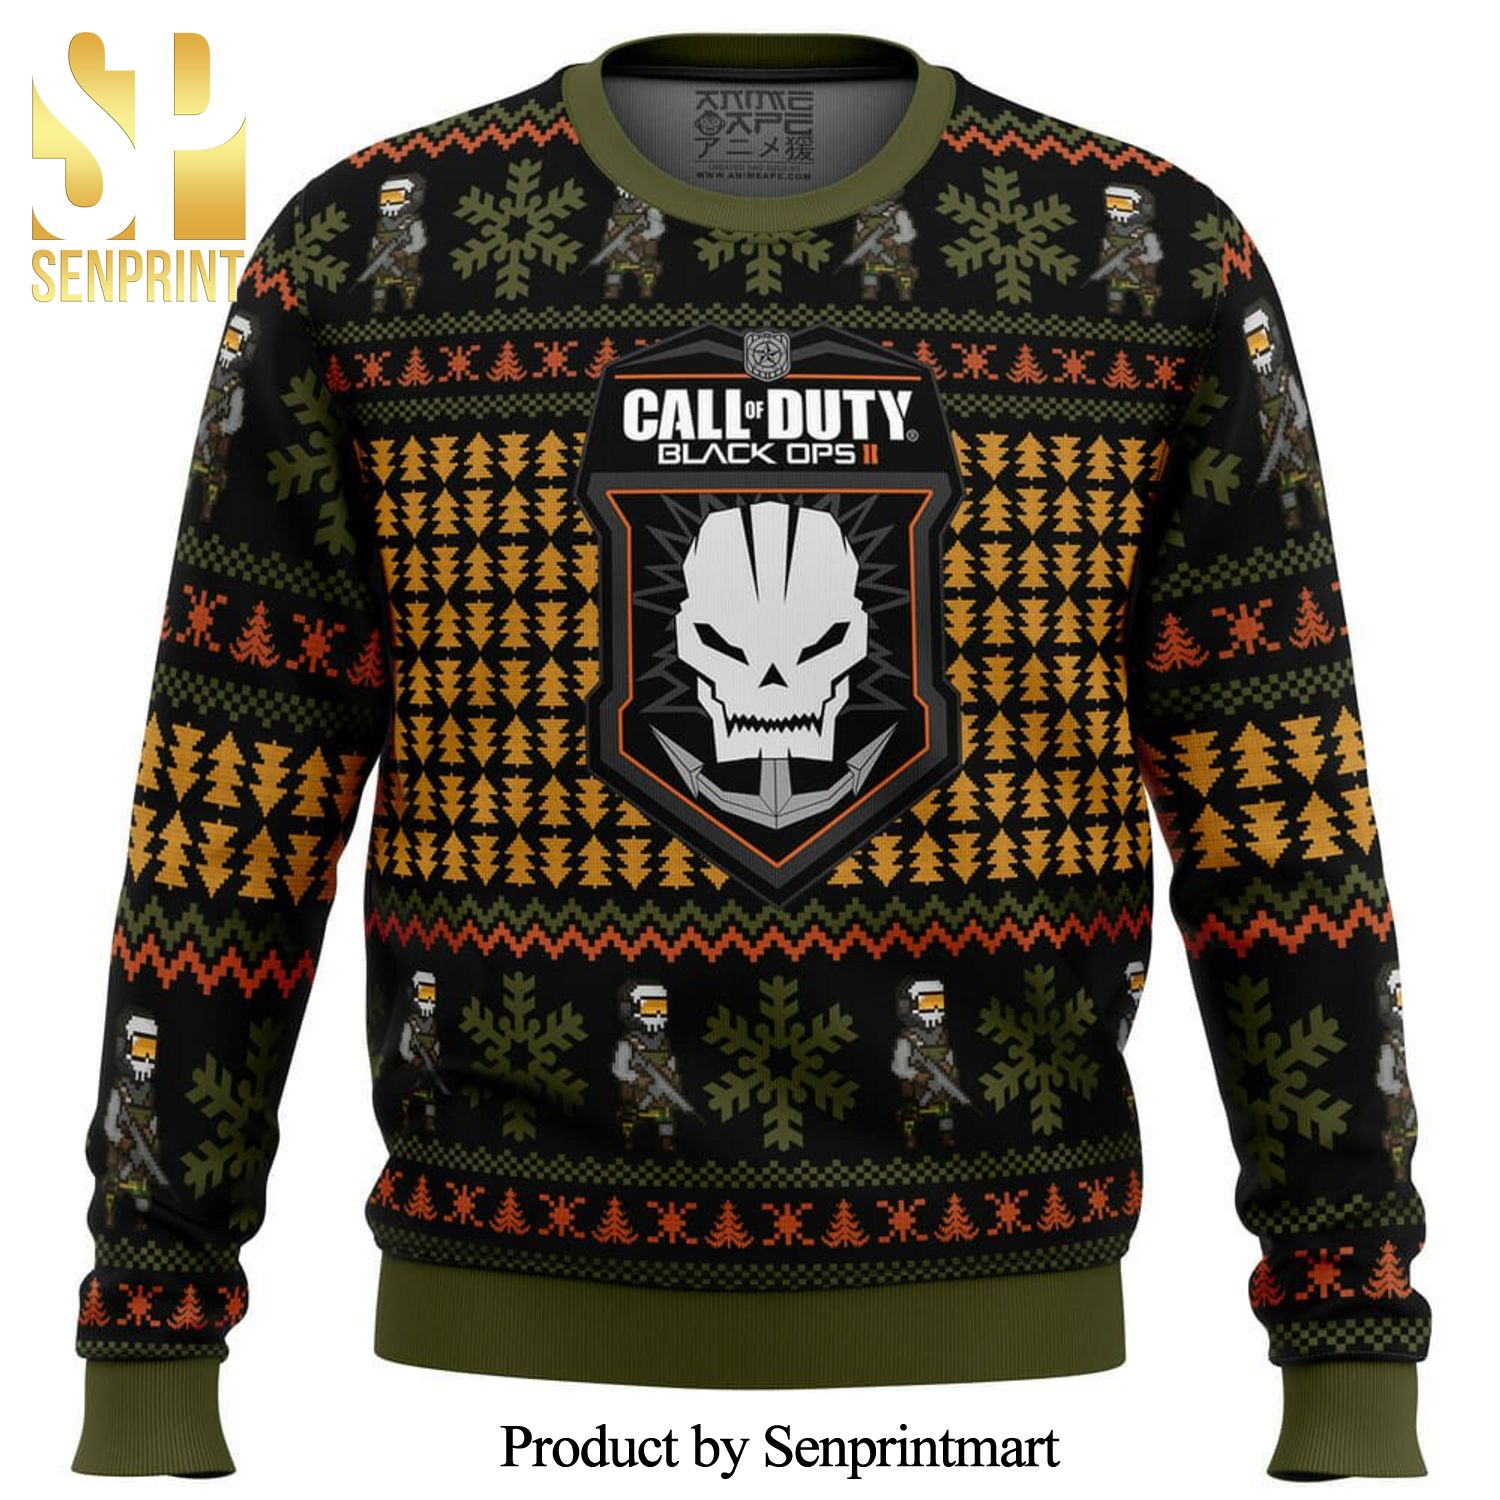 Black Ops 2 Call Of Duty Knitted Ugly Christmas Sweater